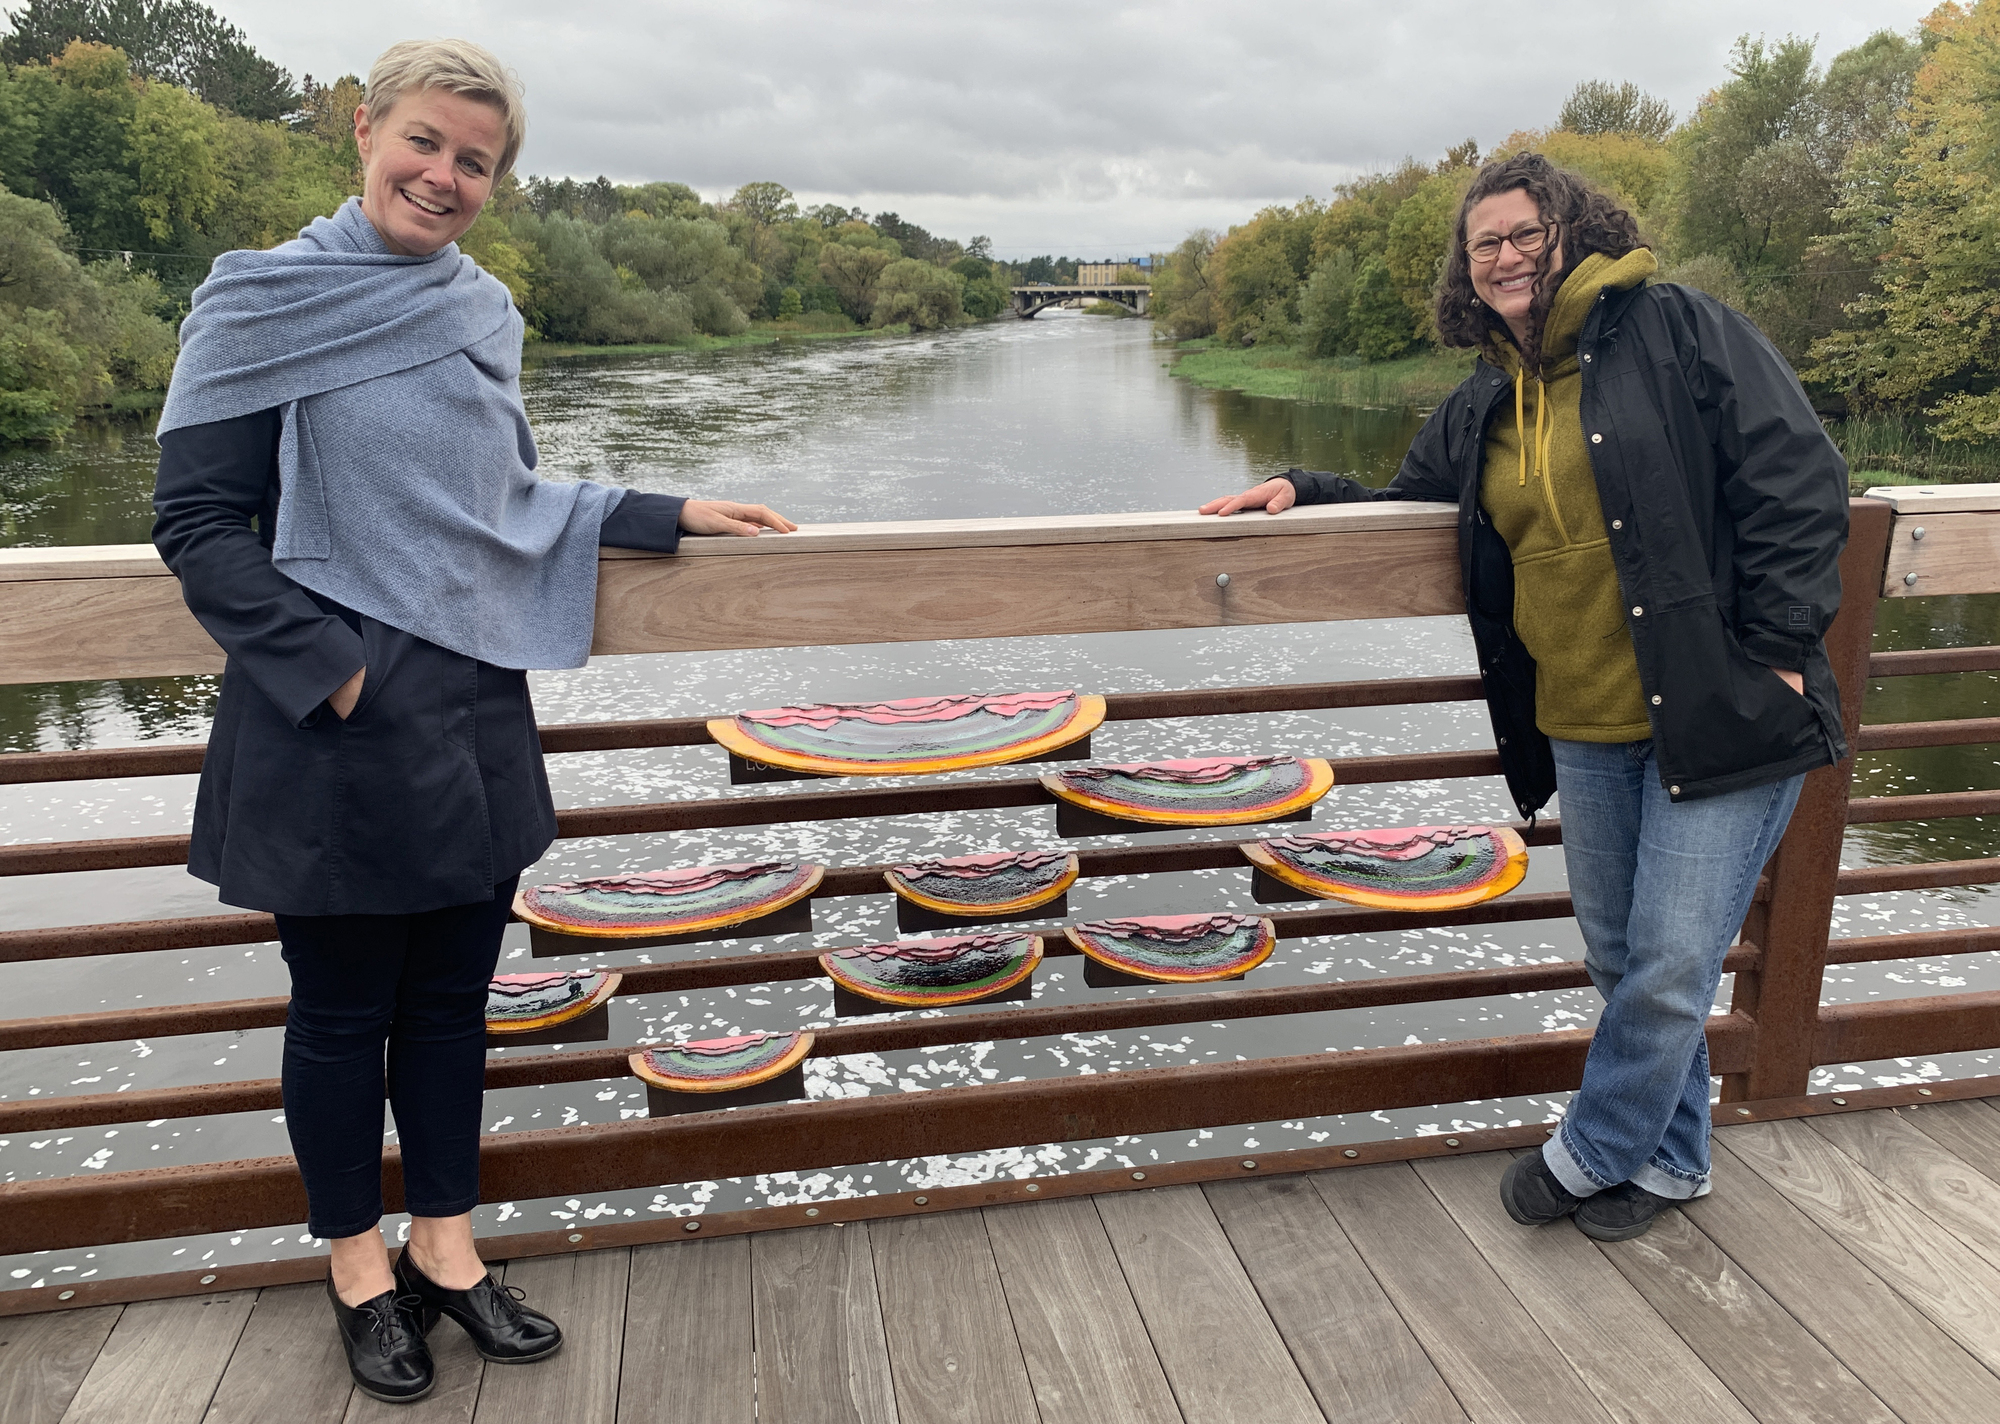 Public art, including this temporary sculpture of colorful fungi on a bridge spanning the Mississippi River, has been popping up around Grand Rapids this year, thanks to the city’s Arts and Culture Commission. At left is Sonja Merrild, commission chair, with artist Nicole Camene.